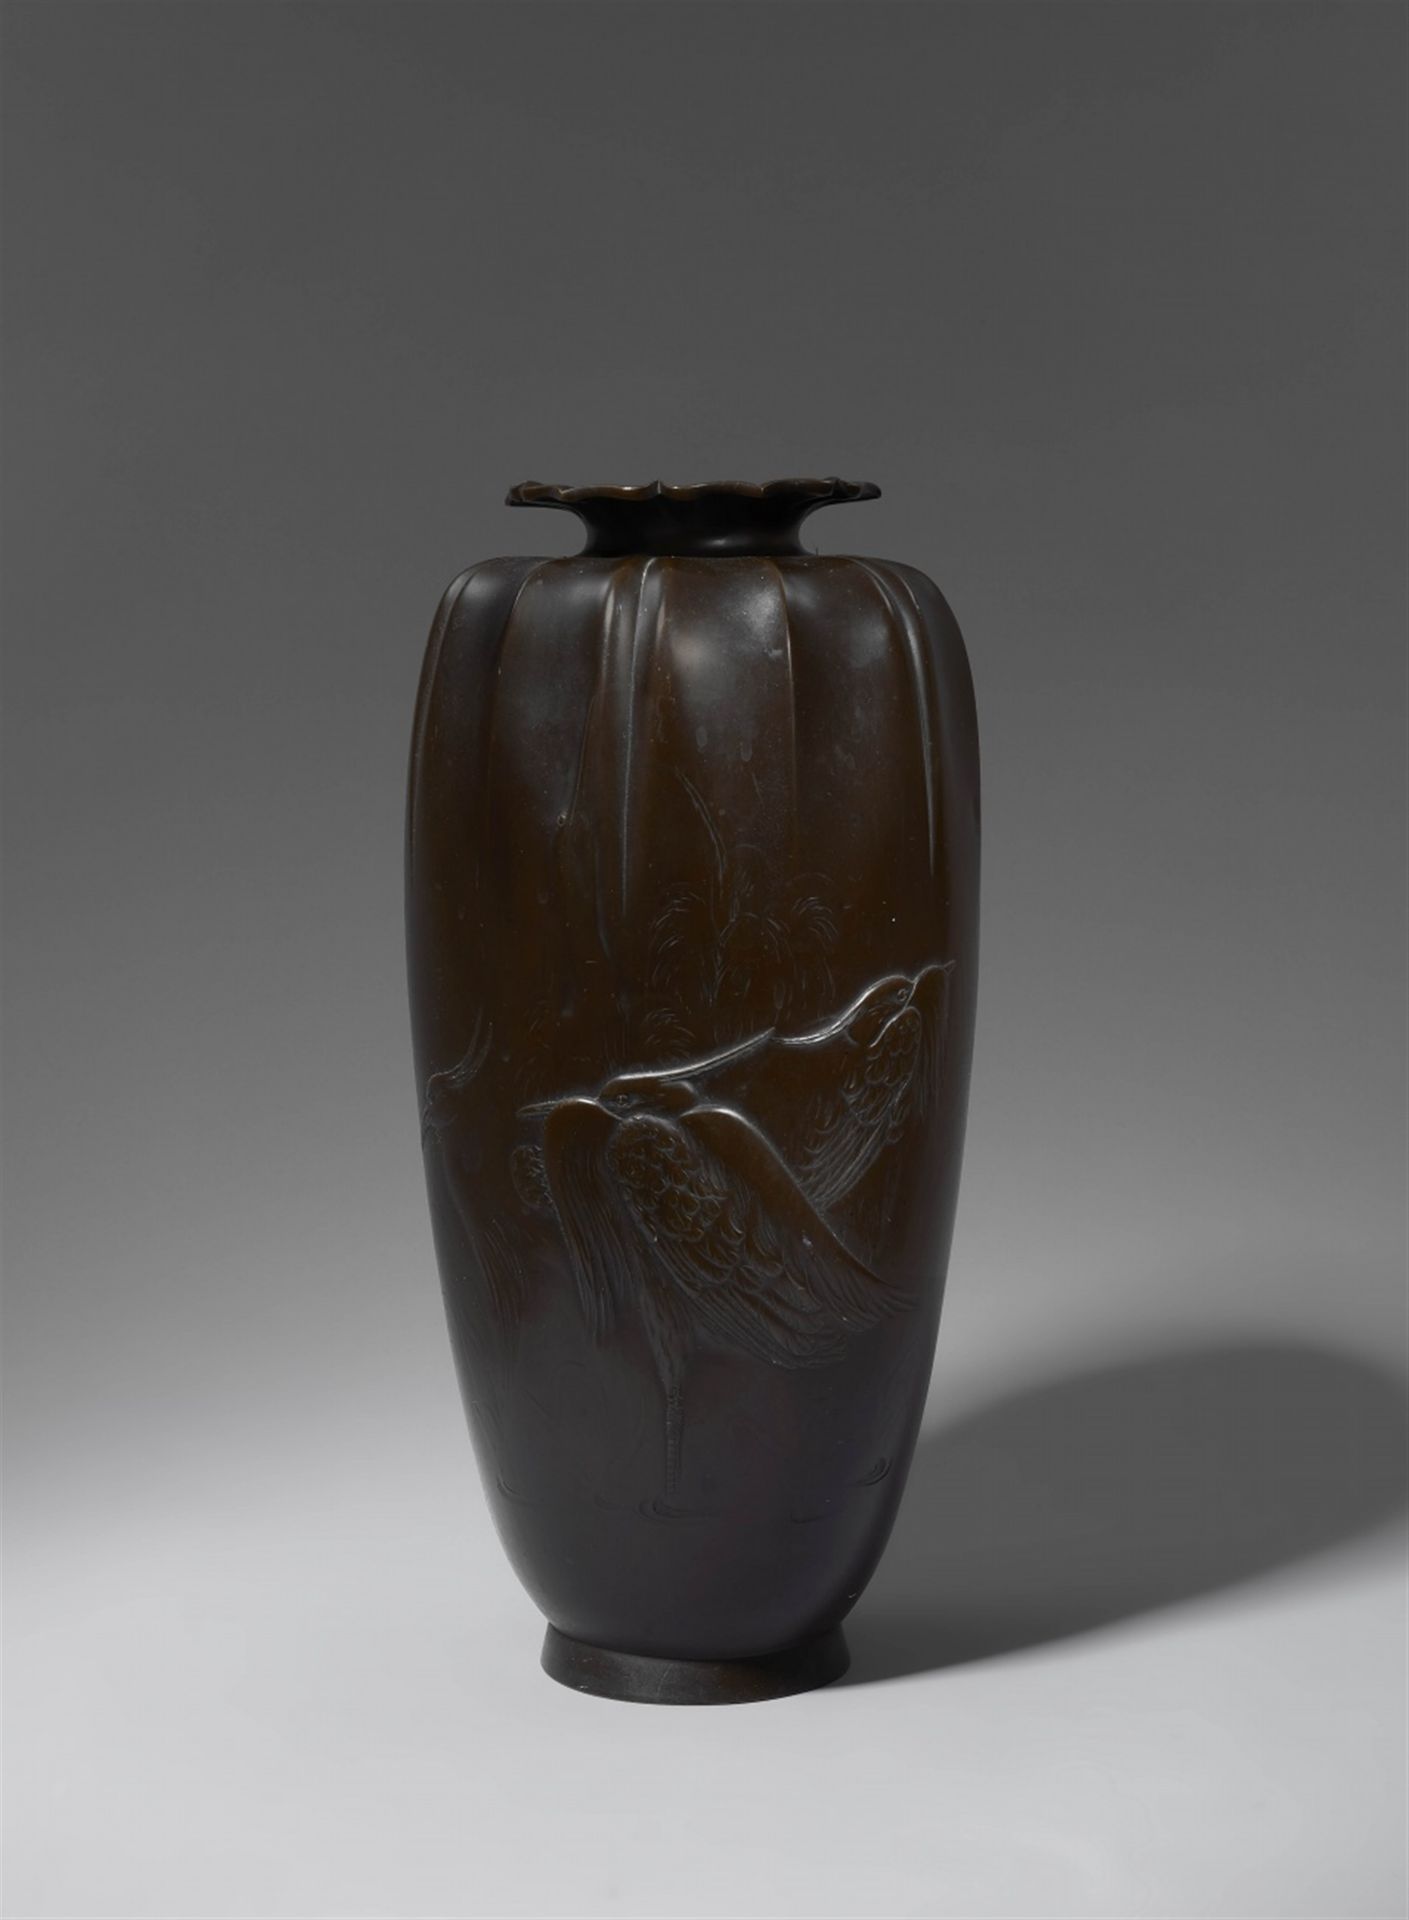 A very large bronze vase. Late 19th century